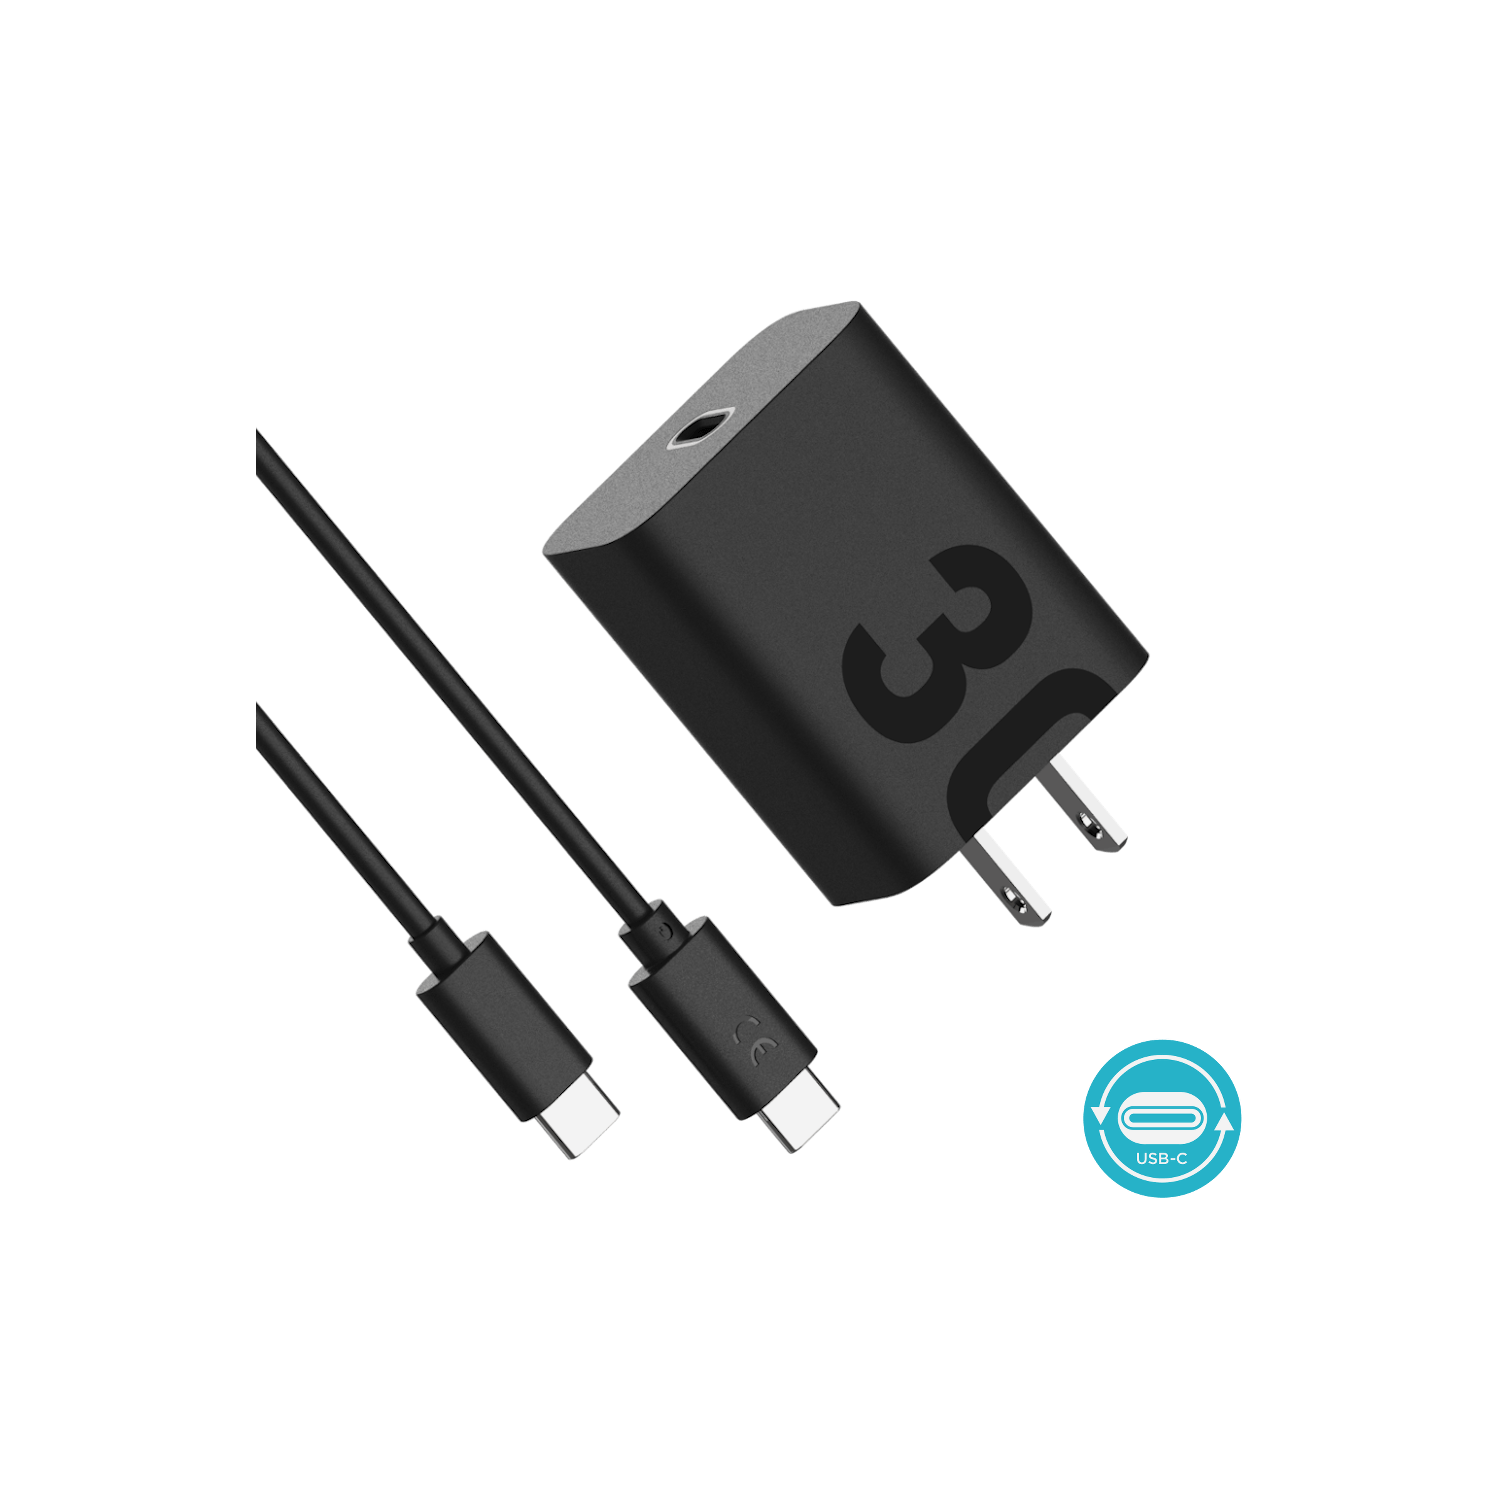 TurboPower™ 30 Wall Charger with USB-C to USB-C Data Cable